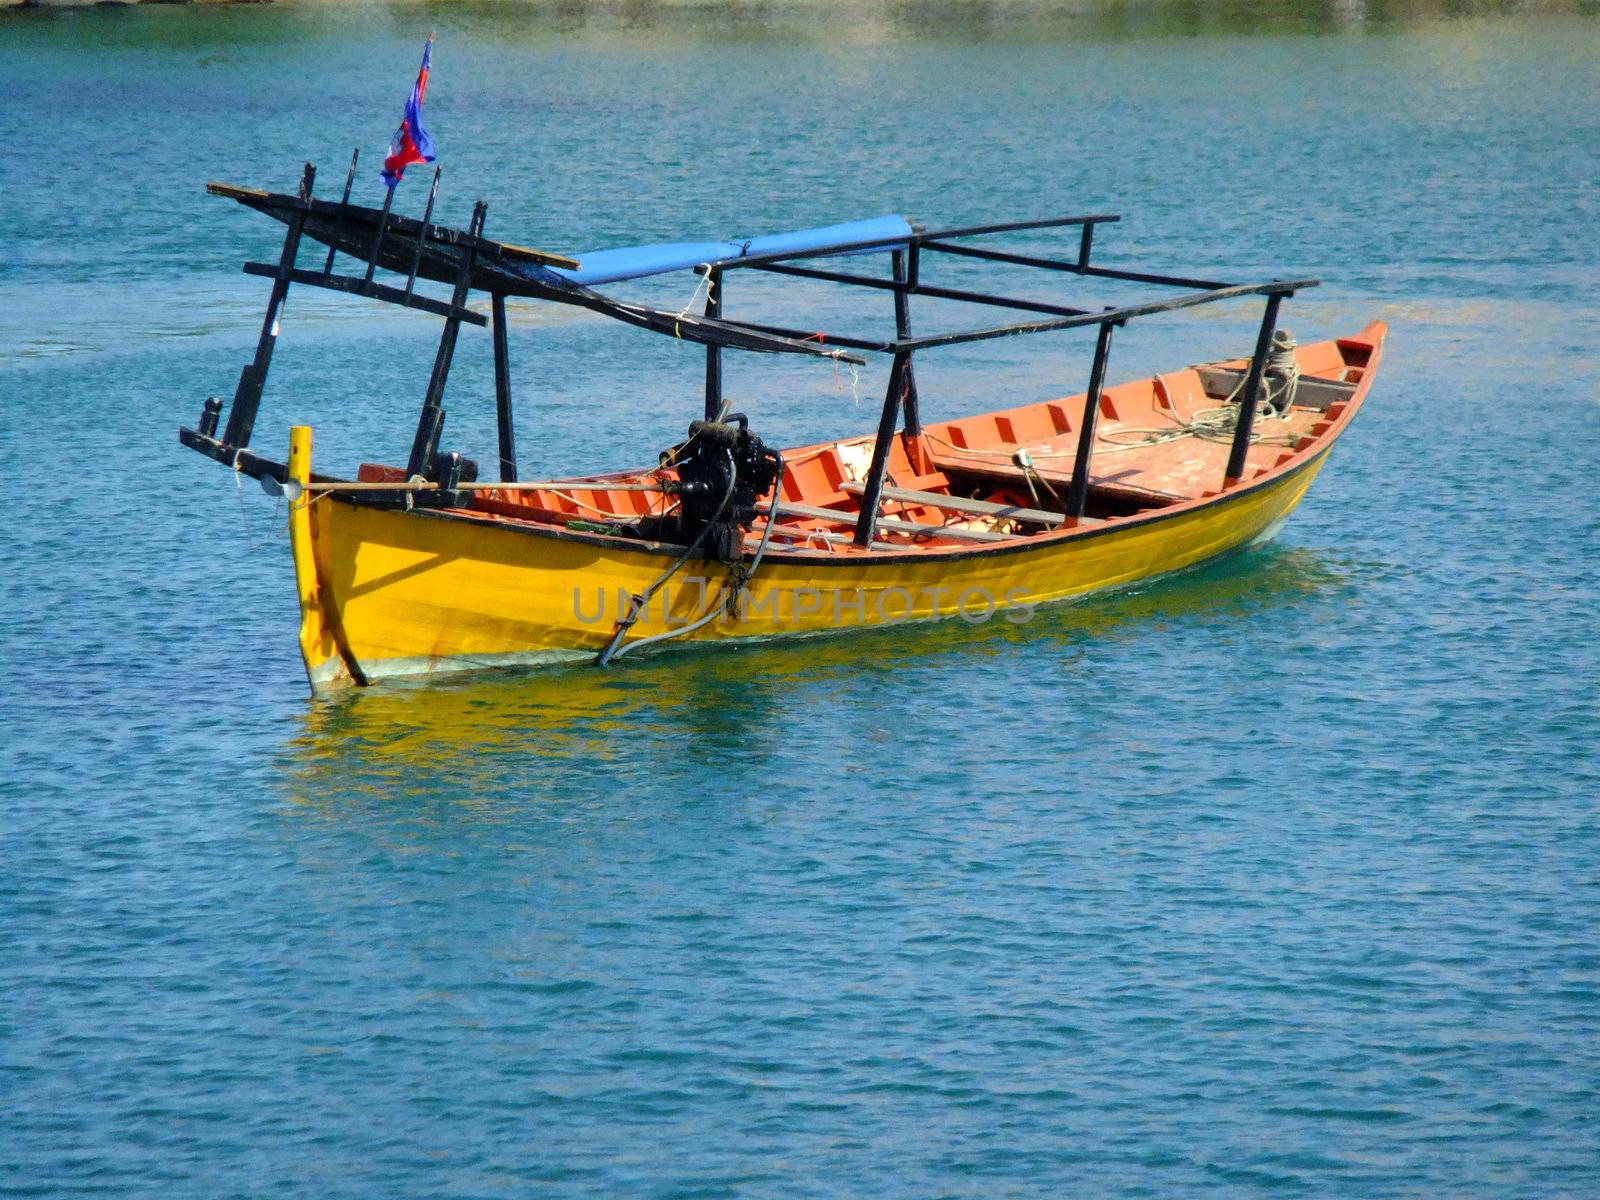 Traditional wooden boat, Sihanoukville, Cambodia, Southeast Asia